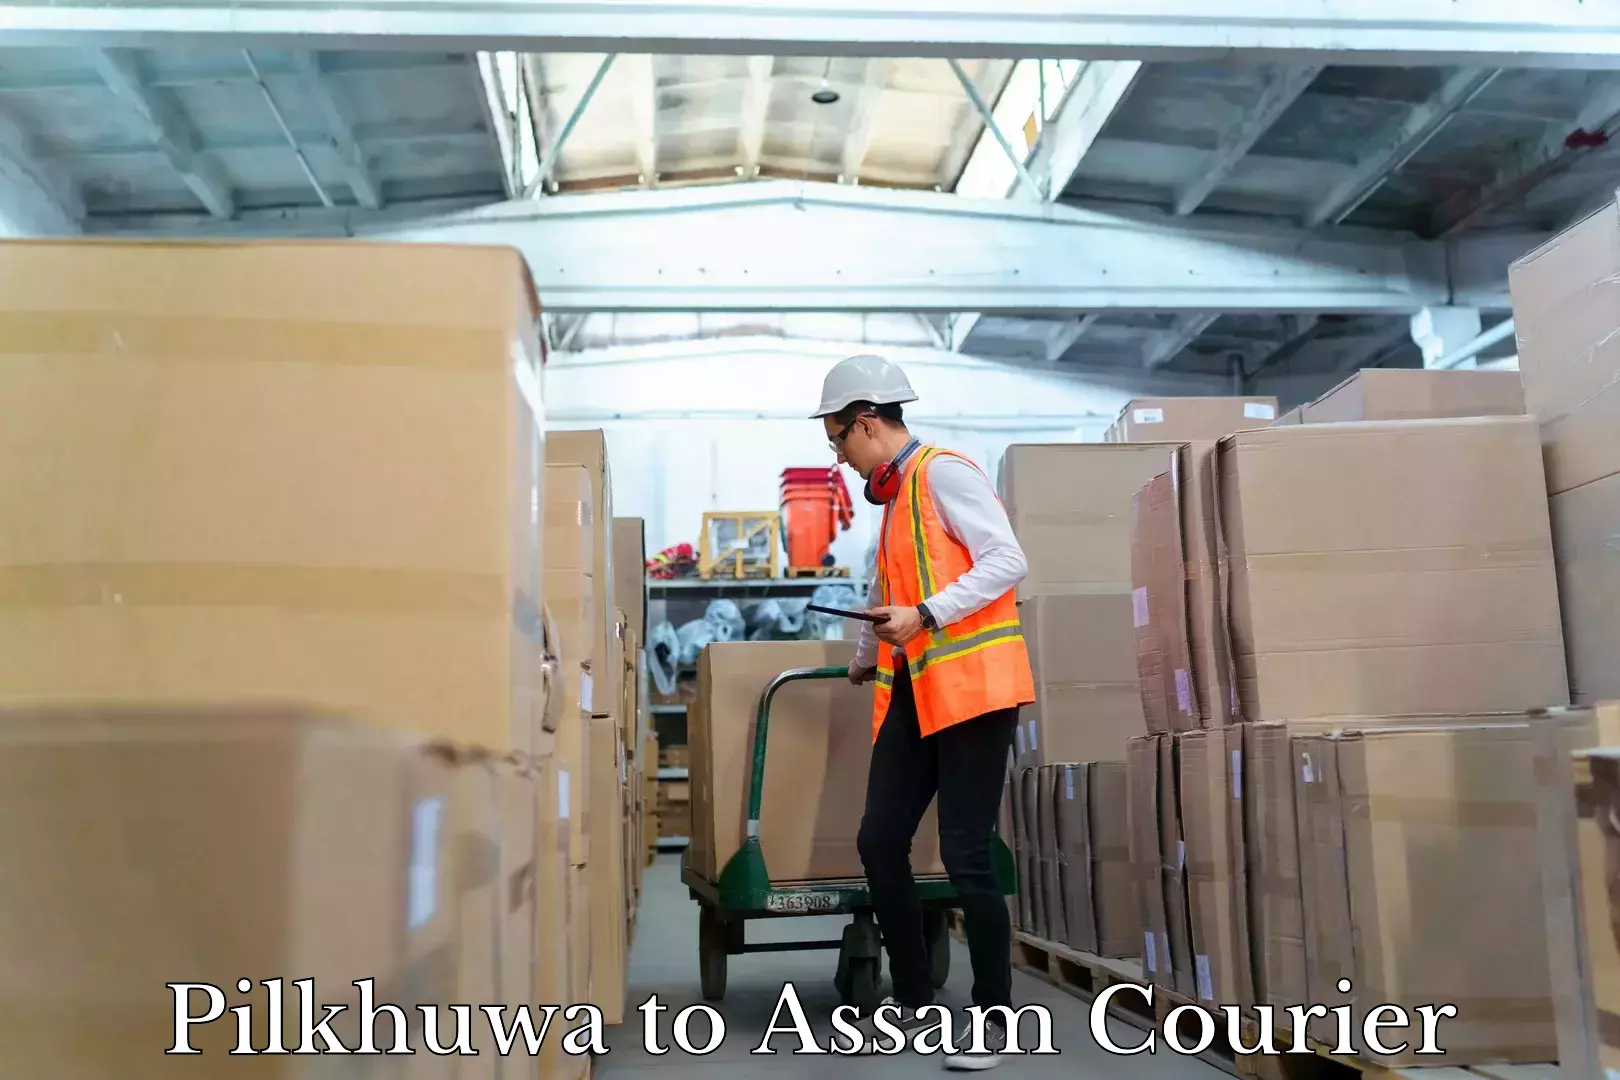 Global courier networks Pilkhuwa to Assam